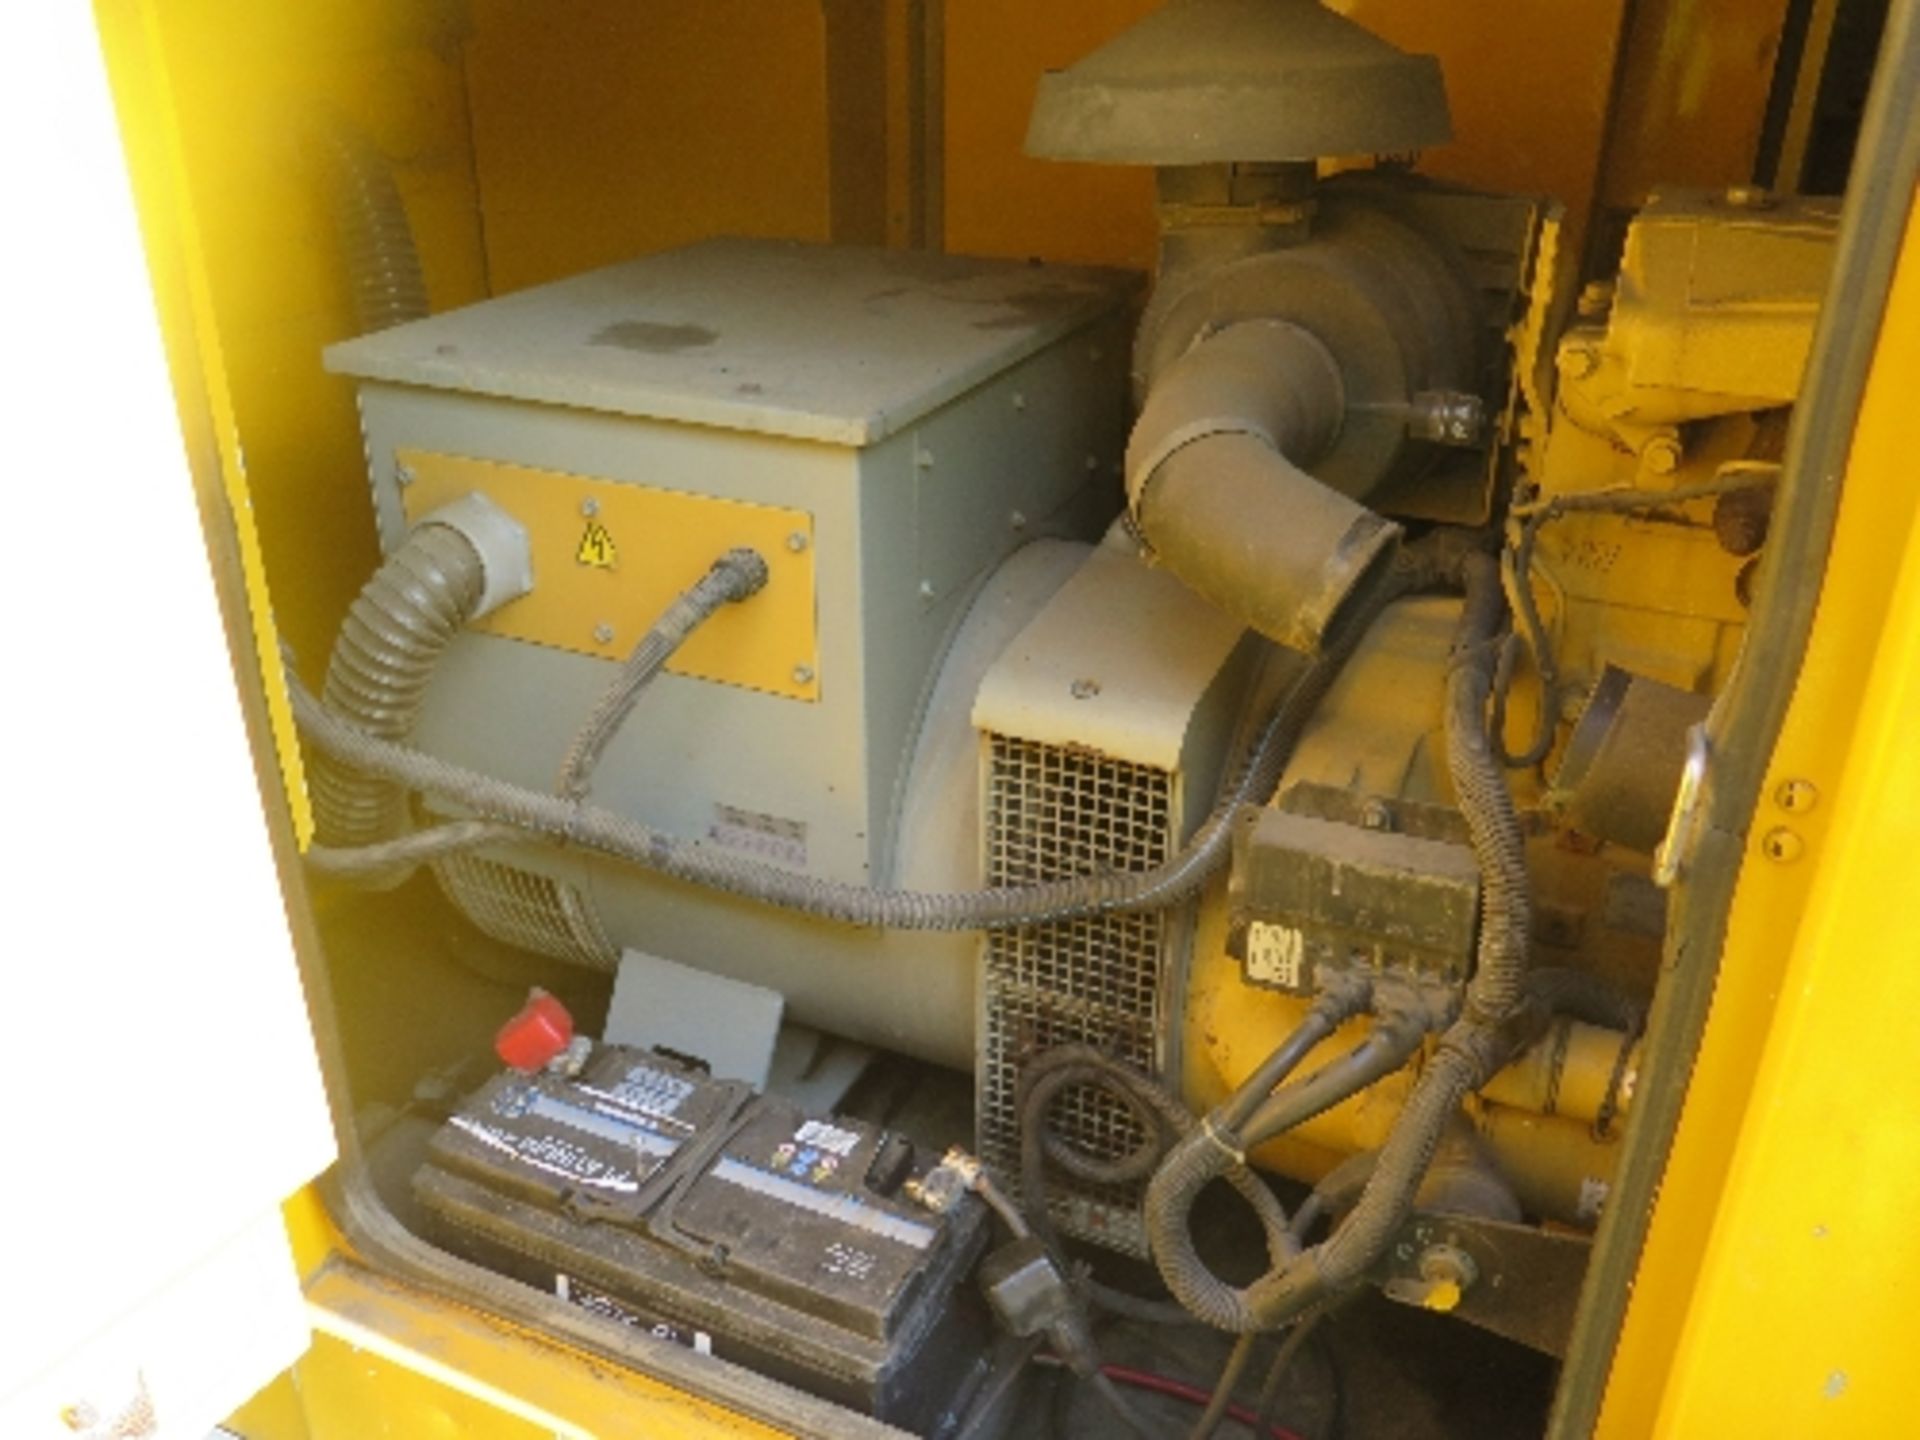 Caterpillar XQE100 generator 18121 hrs 138848
PERKINS - RUNS AND MAKES POWER
ALL LOTS are SOLD - Image 5 of 7